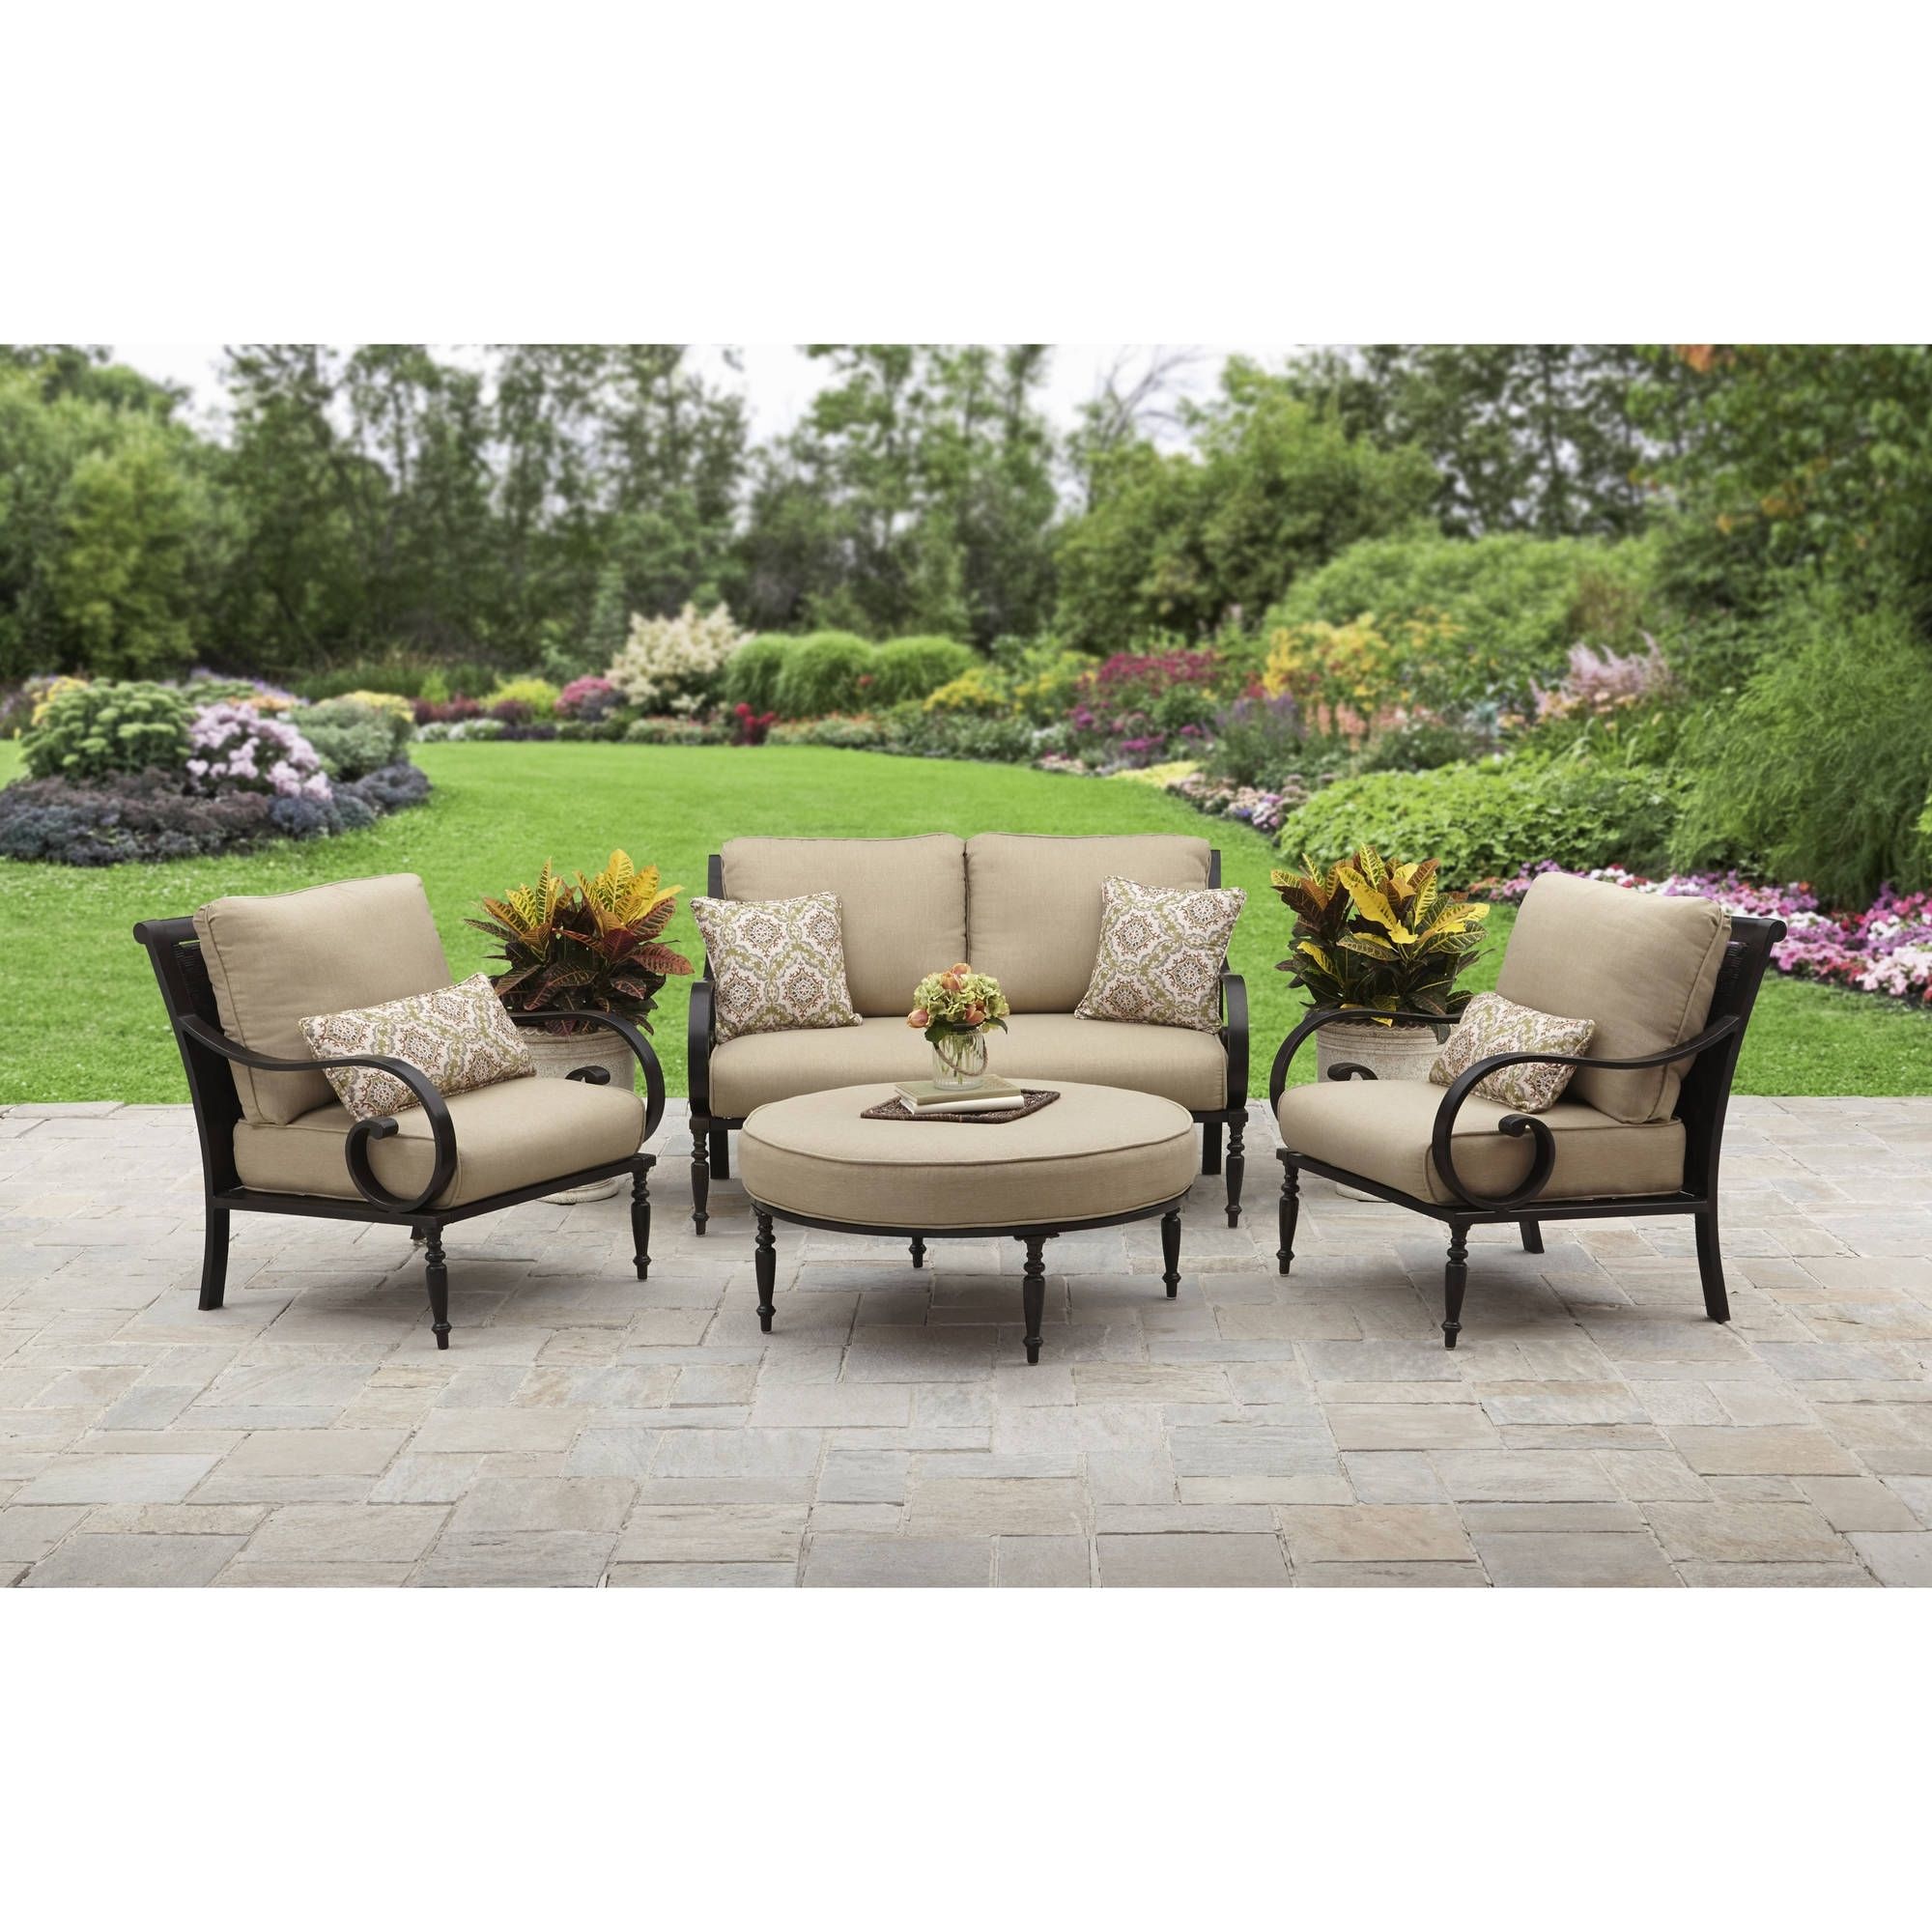 Walmart Patio Furniture Conversation Sets For Well Known Better Homes And Gardens Englewood Heights Ii Aluminum 4 Piece (View 1 of 20)